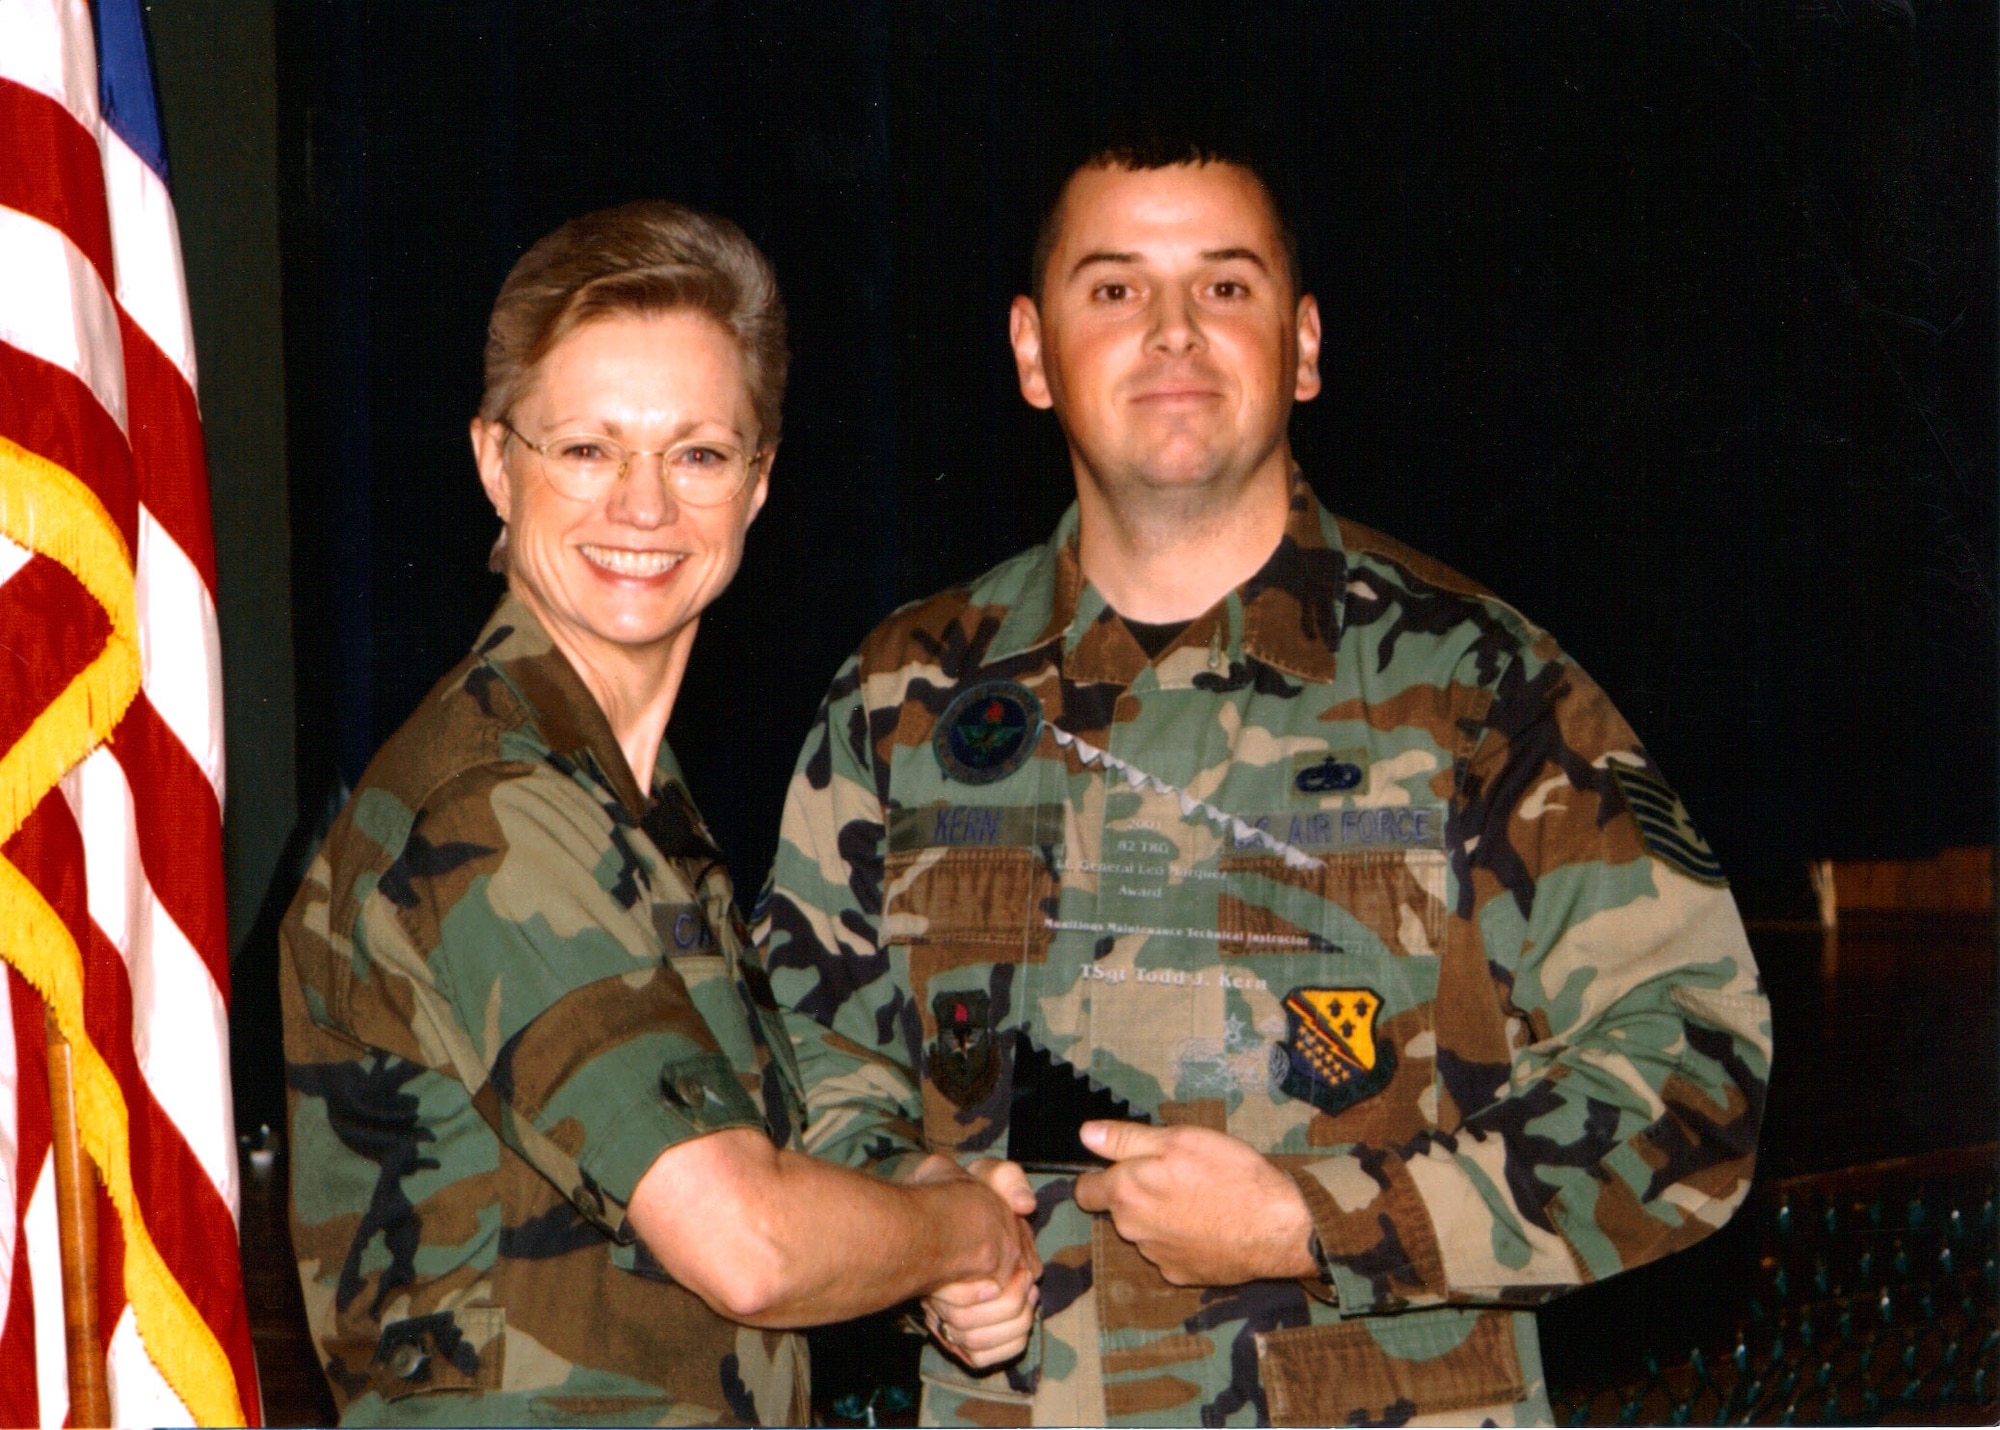 Todd Kern served as a technical training school instructor at Sheppard Air Force Base, Texas, from 1998 to 2002. (Courtesy photo)